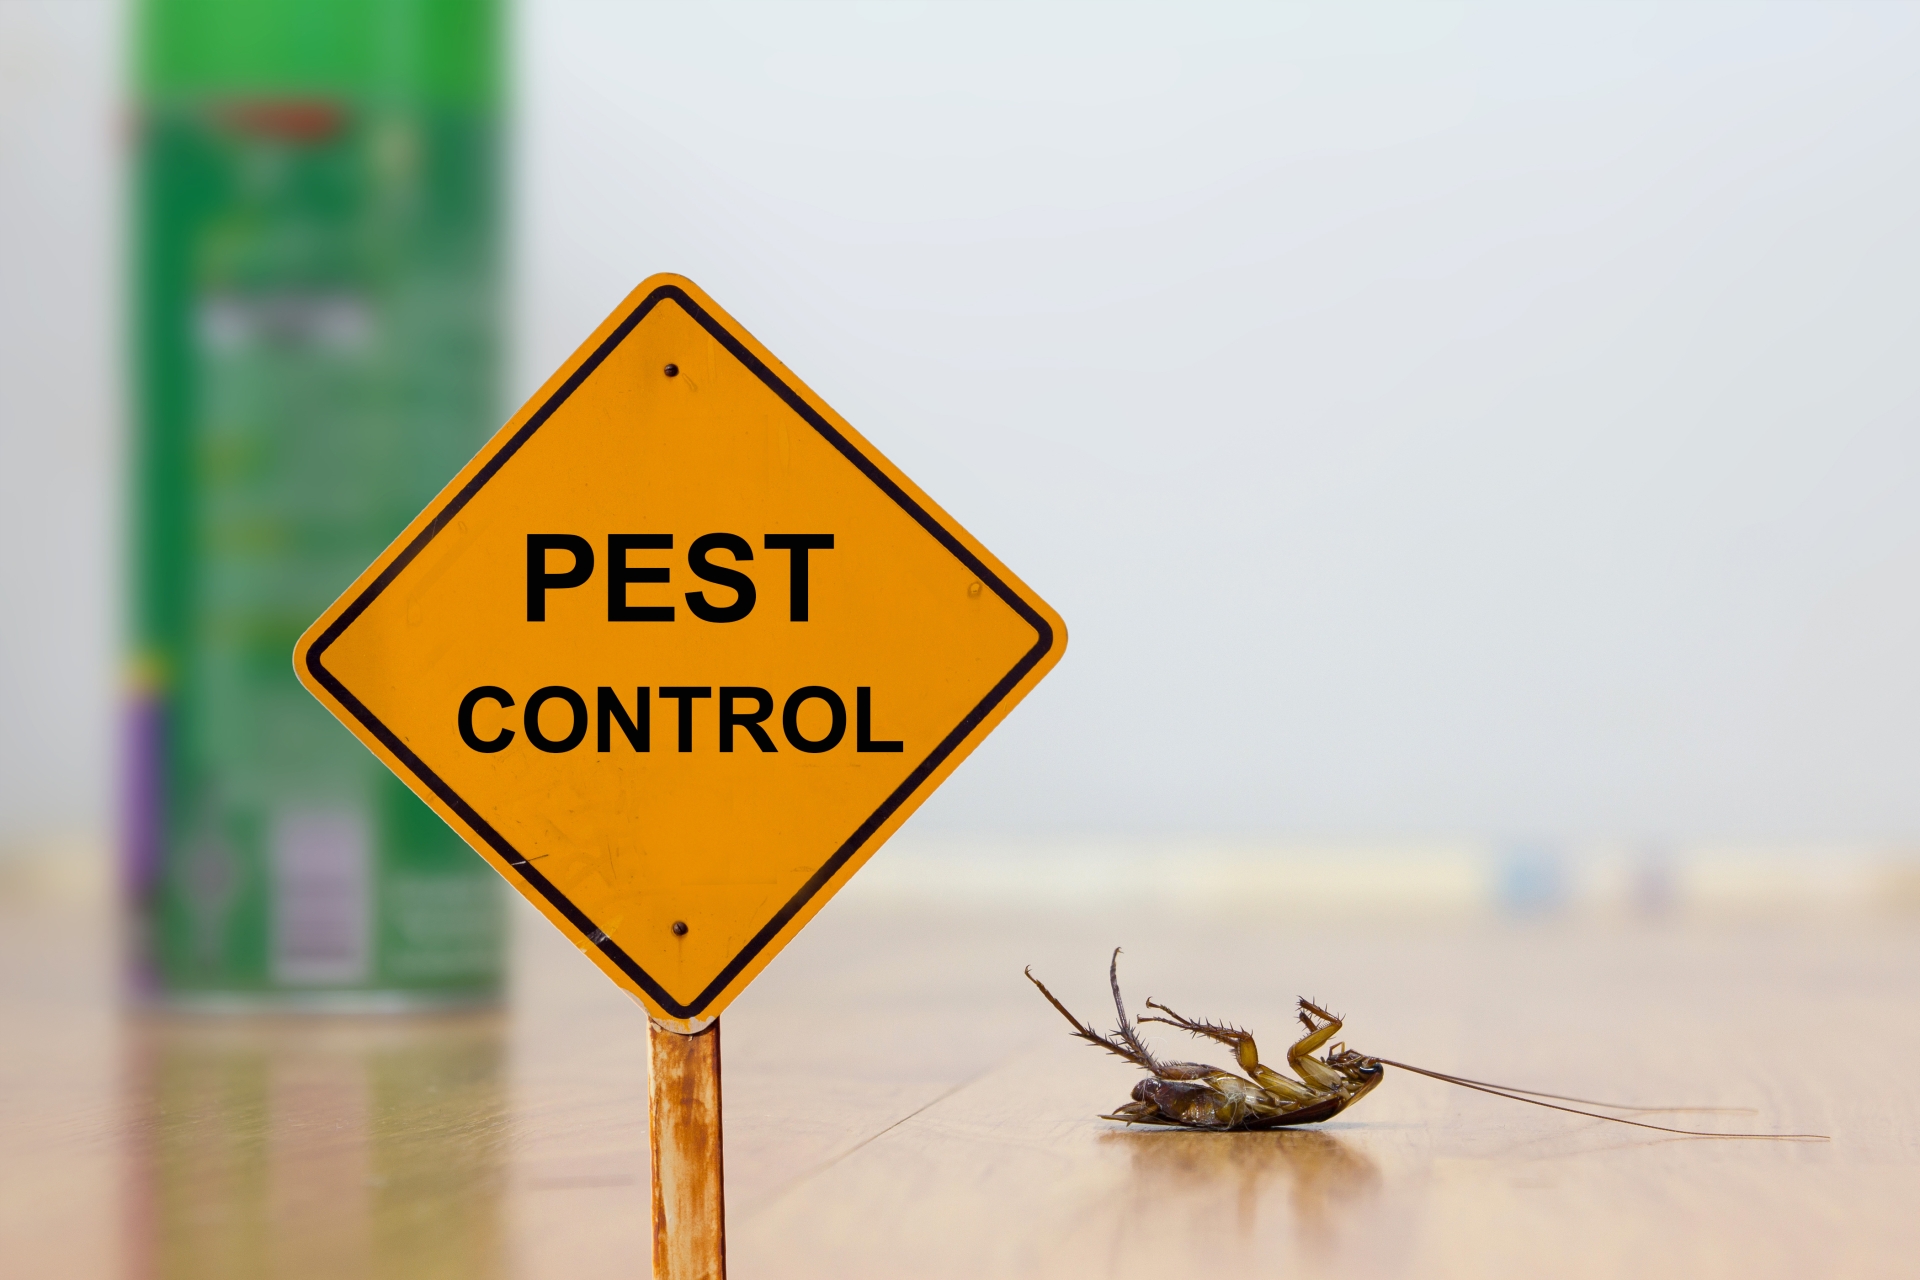 24 Hour Pest Control, Pest Control in Earlsfield, SW18. Call Now 020 8166 9746